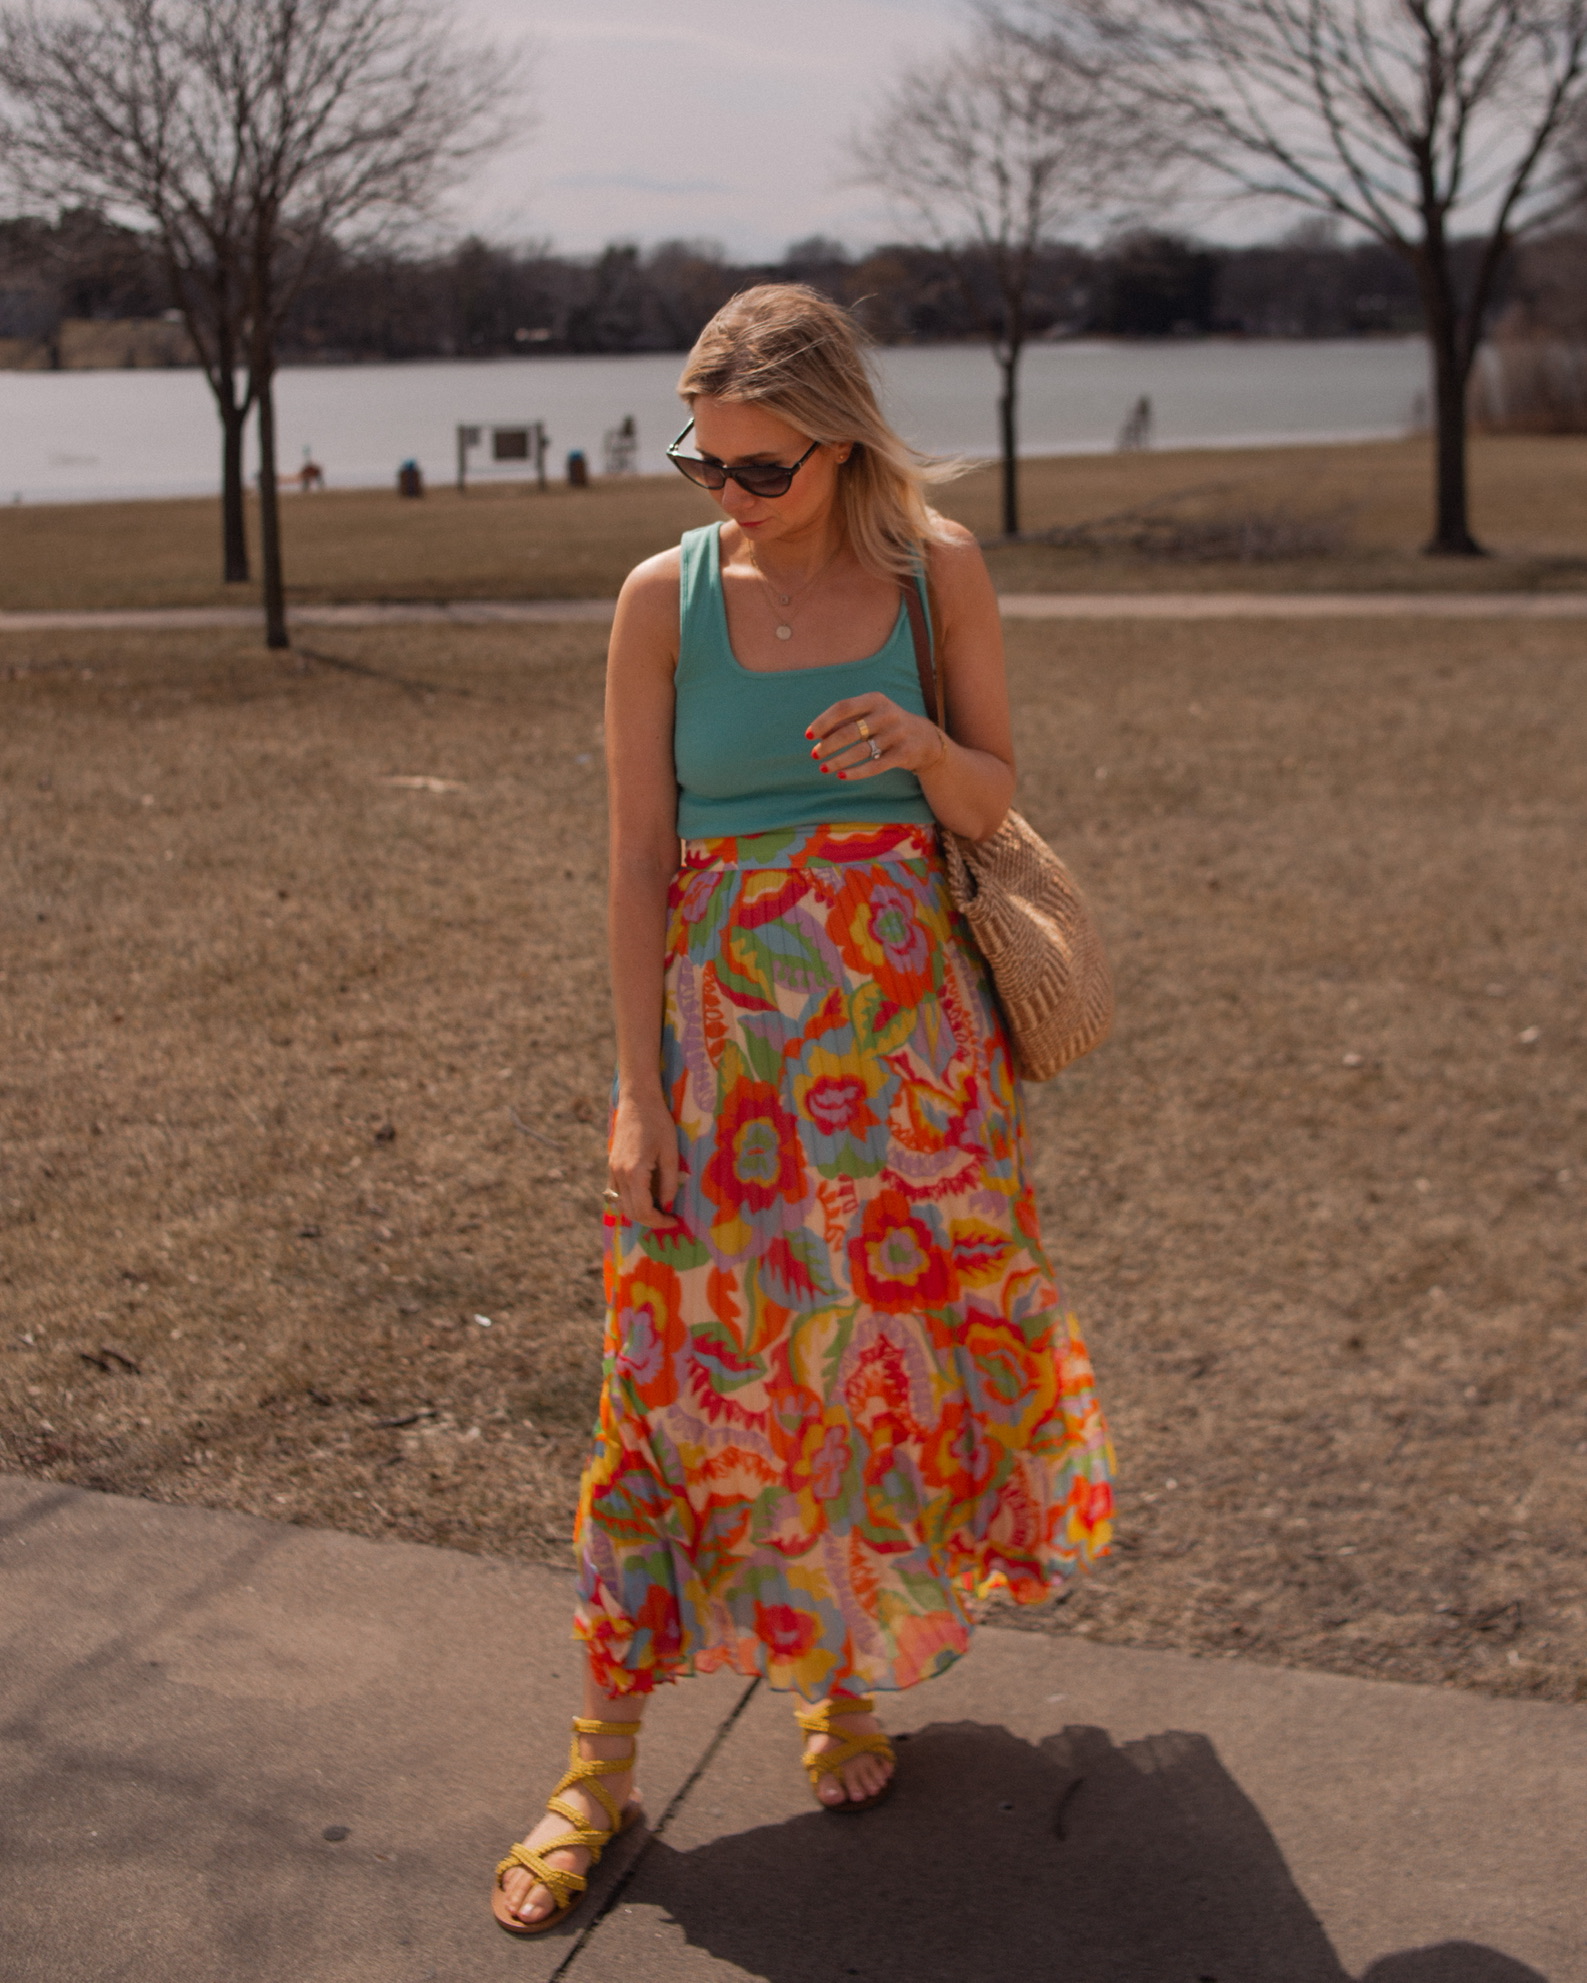 Karin Emily wears a turquoise juan t-shirt from Sezane with A brightly colored floral maxi skirt, yellow sandals, and Isabel Marant Cat Eye Sunglasses